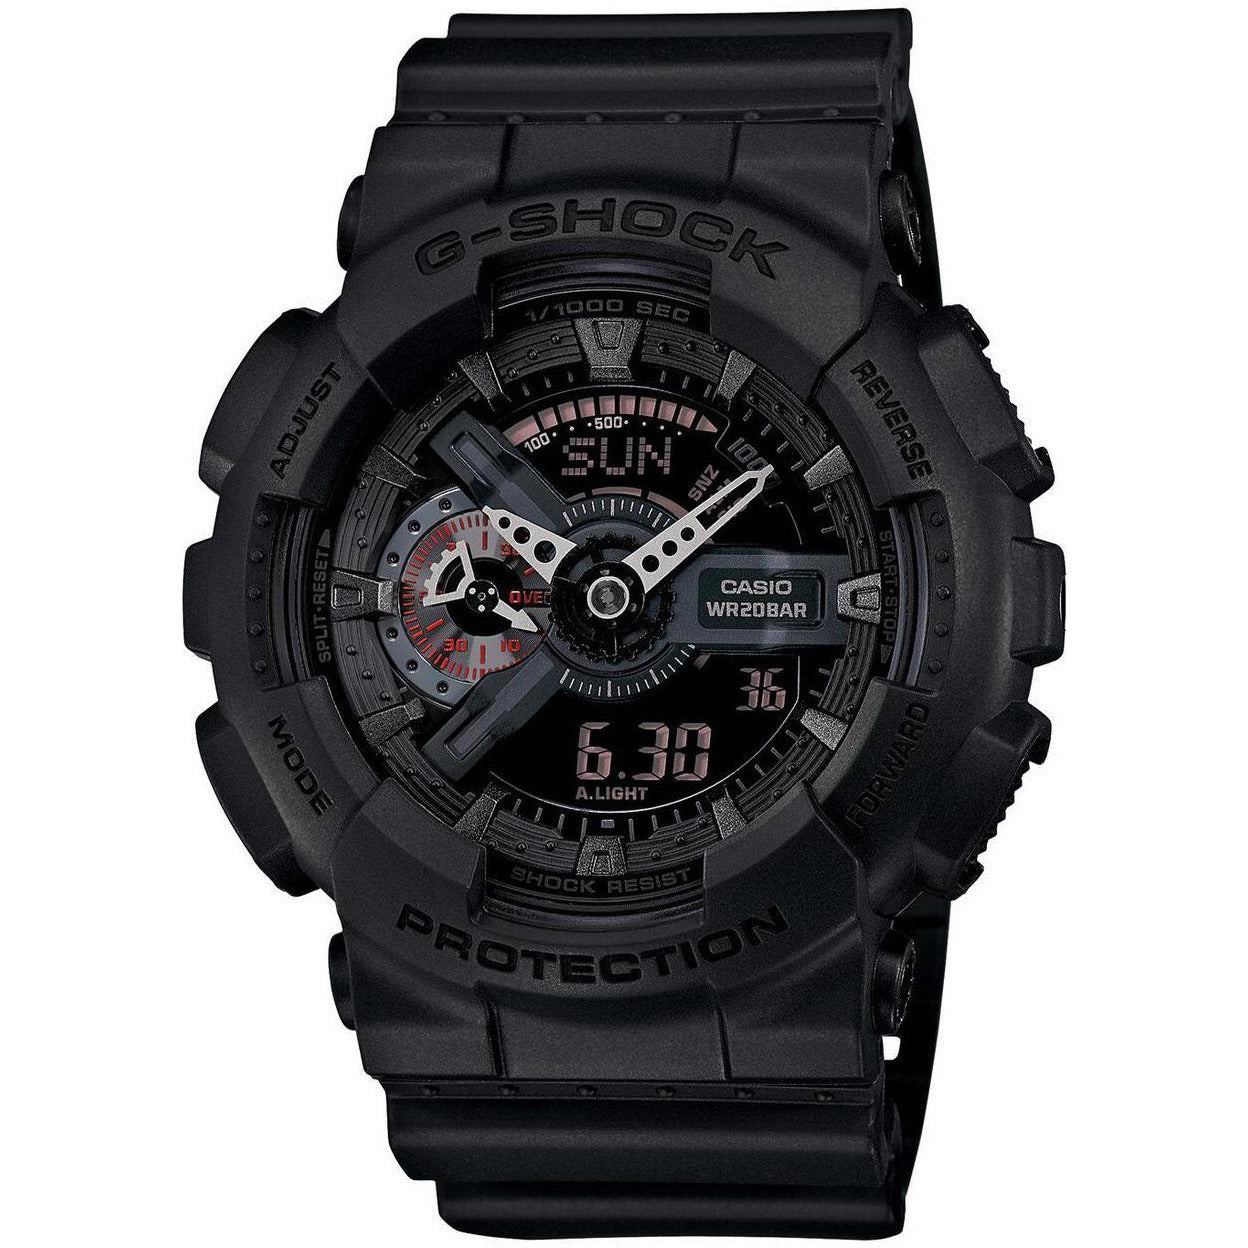 Dempsey Refrein Majestueus G-Shock Classic Military X-Large Matte Black | Watches.com